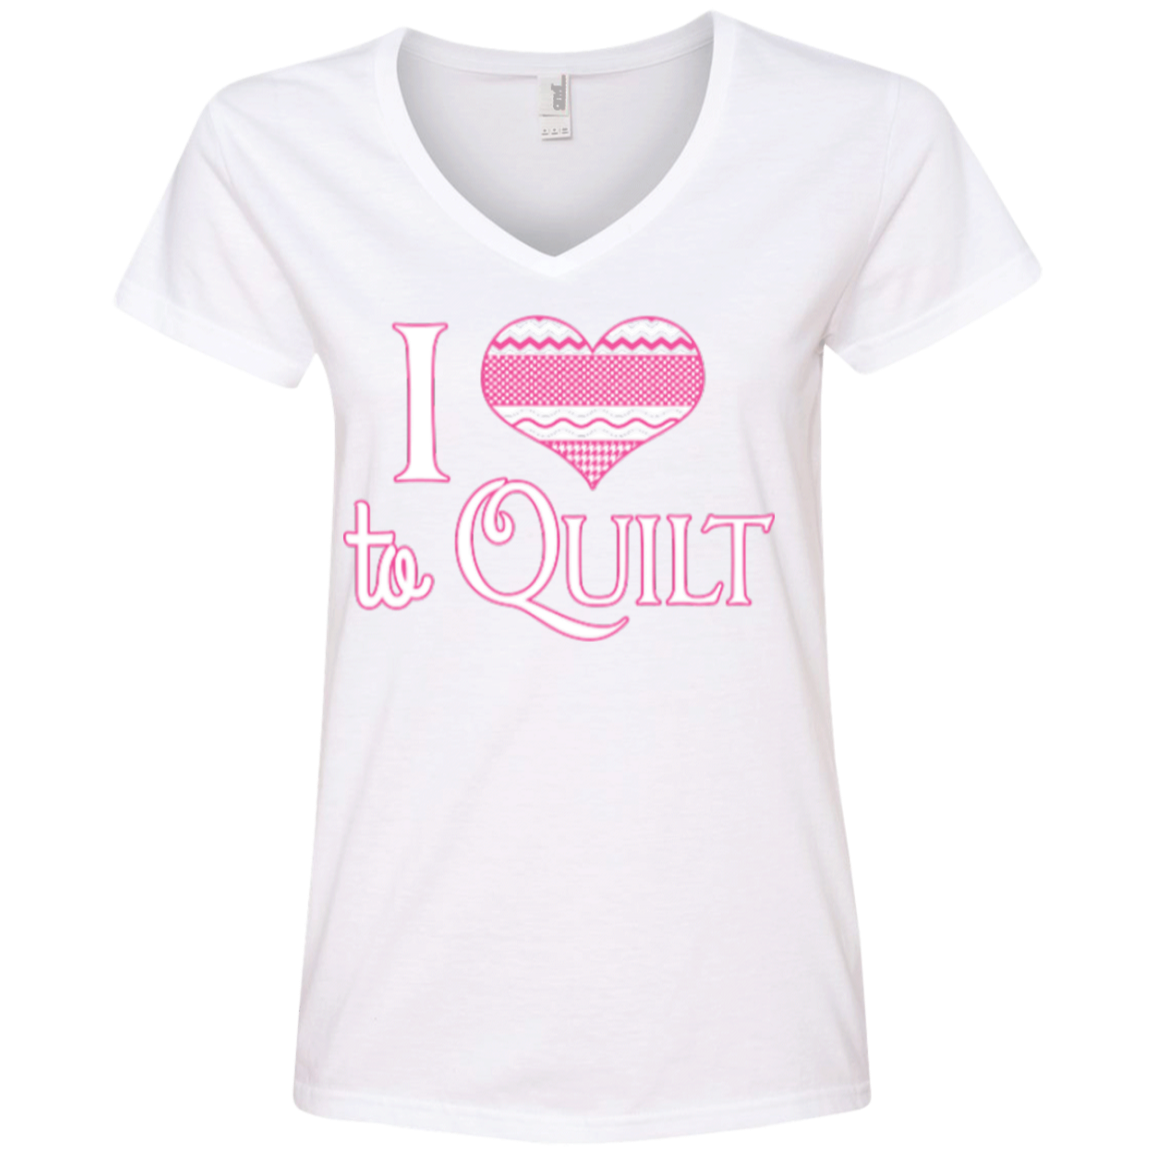 I Heart to Quilt Ladies V-neck Tee - Crafter4Life - 3